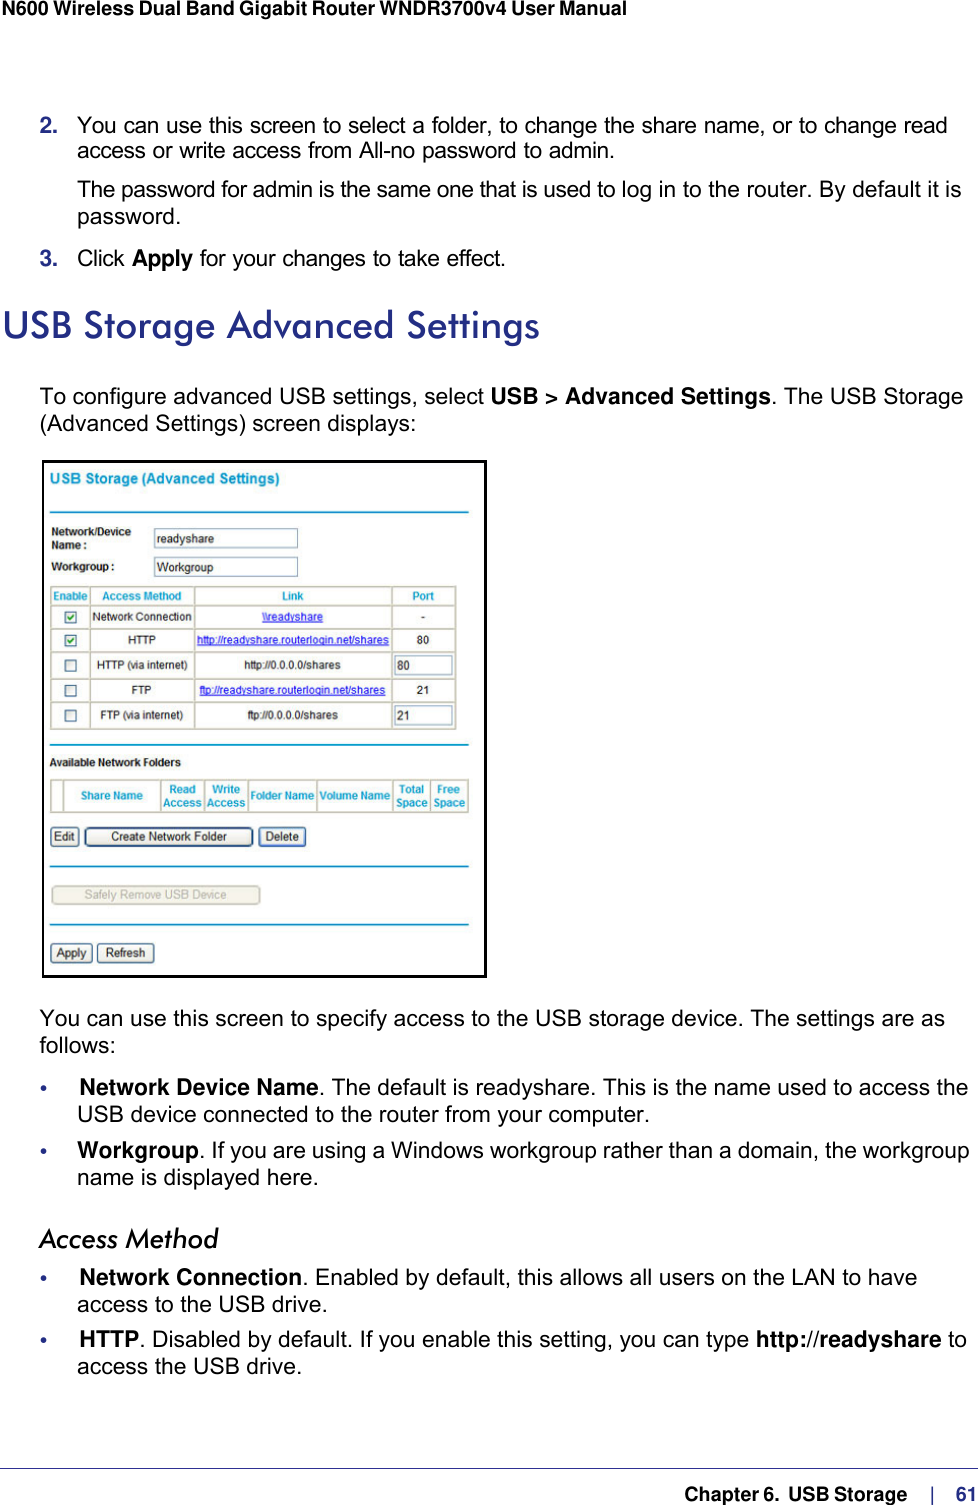   Chapter 6.  USB Storage     |    61N600 Wireless Dual Band Gigabit Router WNDR3700v4 User Manual 2.  You can use this screen to select a folder, to change the share name, or to change read access or write access from All-no password to admin. The password for admin is the same one that is used to log in to the router. By default it is password.3.  Click Apply for your changes to take effect.USB Storage Advanced SettingsTo configure advanced USB settings, select USB &gt; Advanced Settings. The USB Storage (Advanced Settings) screen displays:You can use this screen to specify access to the USB storage device. The settings are as follows:•     Network Device Name. The default is readyshare. This is the name used to access the USB device connected to the router from your computer.•     Workgroup. If you are using a Windows workgroup rather than a domain, the workgroup name is displayed here.Access Method•     Network Connection. Enabled by default, this allows all users on the LAN to have access to the USB drive.•     HTTP. Disabled by default. If you enable this setting, you can type http://readyshare to access the USB drive.